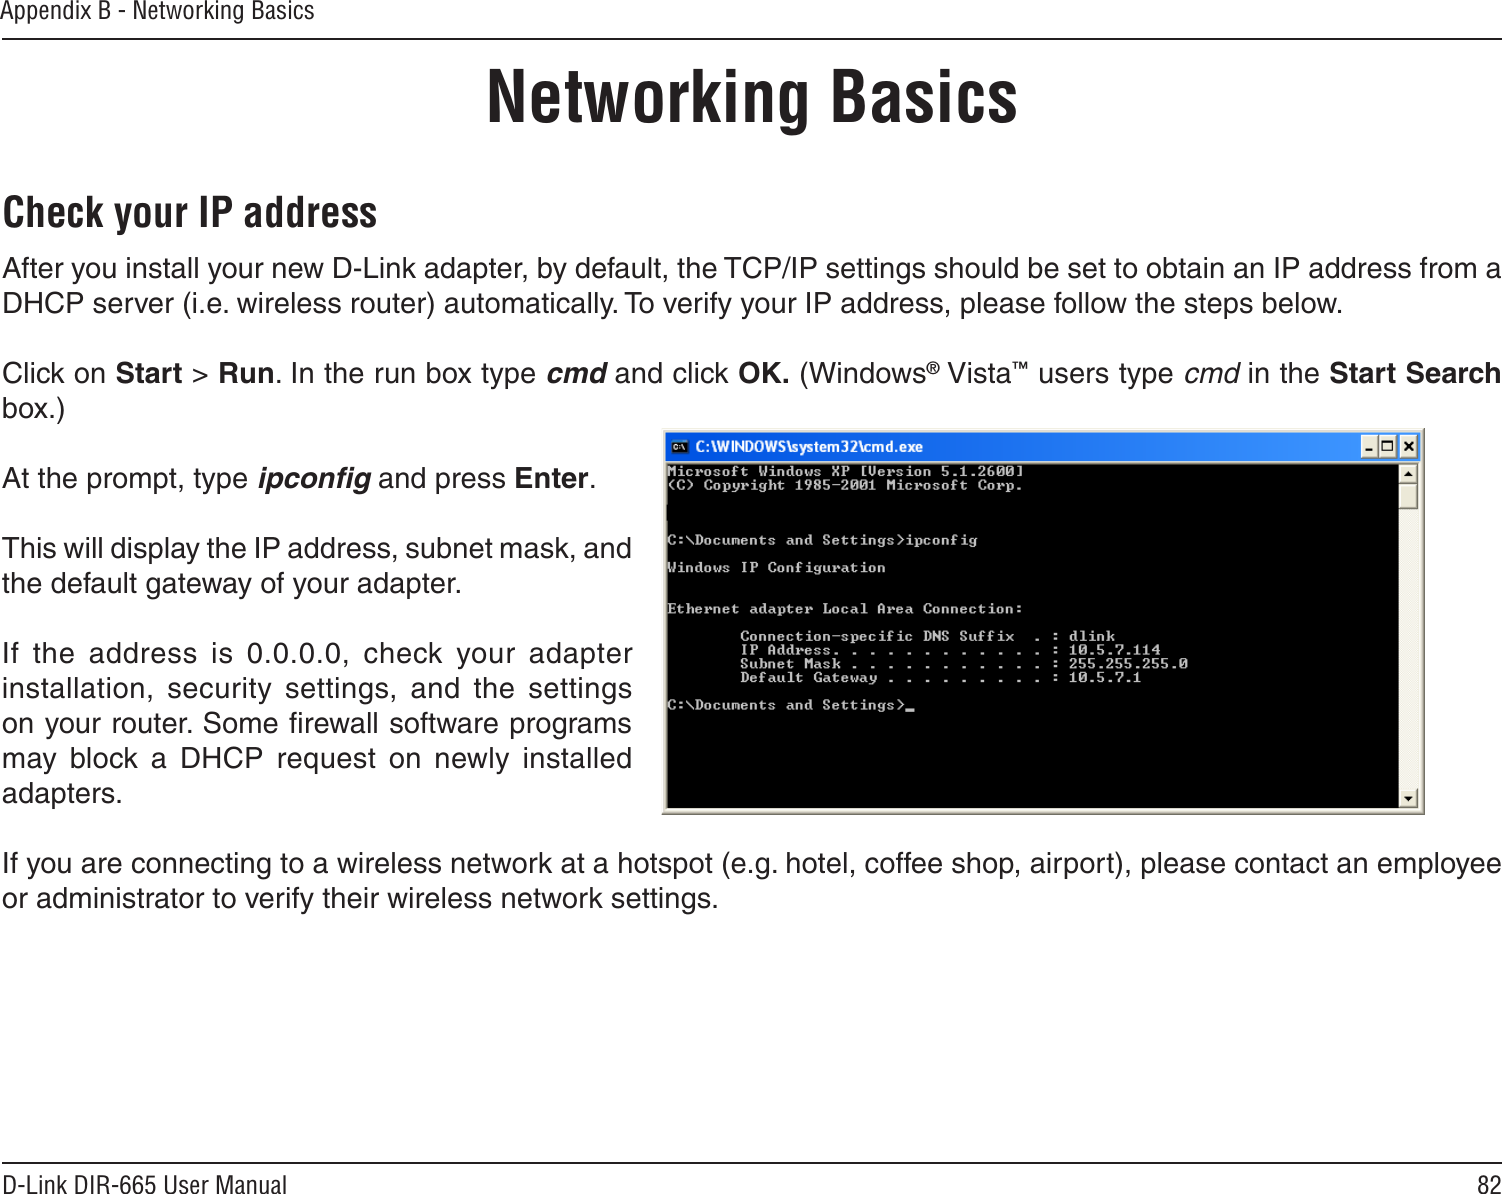 82D-Link DIR-665 User ManualAppendix B - Networking BasicsNetworking BasicsCheck your IP addressAfter you install your new D-Link adapter, by default, the TCP/IP settings should be set to obtain an IP address from a DHCP server (i.e. wireless router) automatically. To verify your IP address, please follow the steps below.Click on Start &gt; Run. In the run box type cmd and click OK. (Windows® Vista™ users type cmd in the Start Search box.)At the prompt, type ipconﬁg and press Enter.This will display the IP address, subnet mask, and the default gateway of your adapter.If  the  address  is  0.0.0.0,  check  your  adapter installation,  security  settings,  and  the  settings on your router. Some ﬁrewall software programs may  block  a  DHCP  request  on  newly  installed adapters. If you are connecting to a wireless network at a hotspot (e.g. hotel, coffee shop, airport), please contact an employee or administrator to verify their wireless network settings.